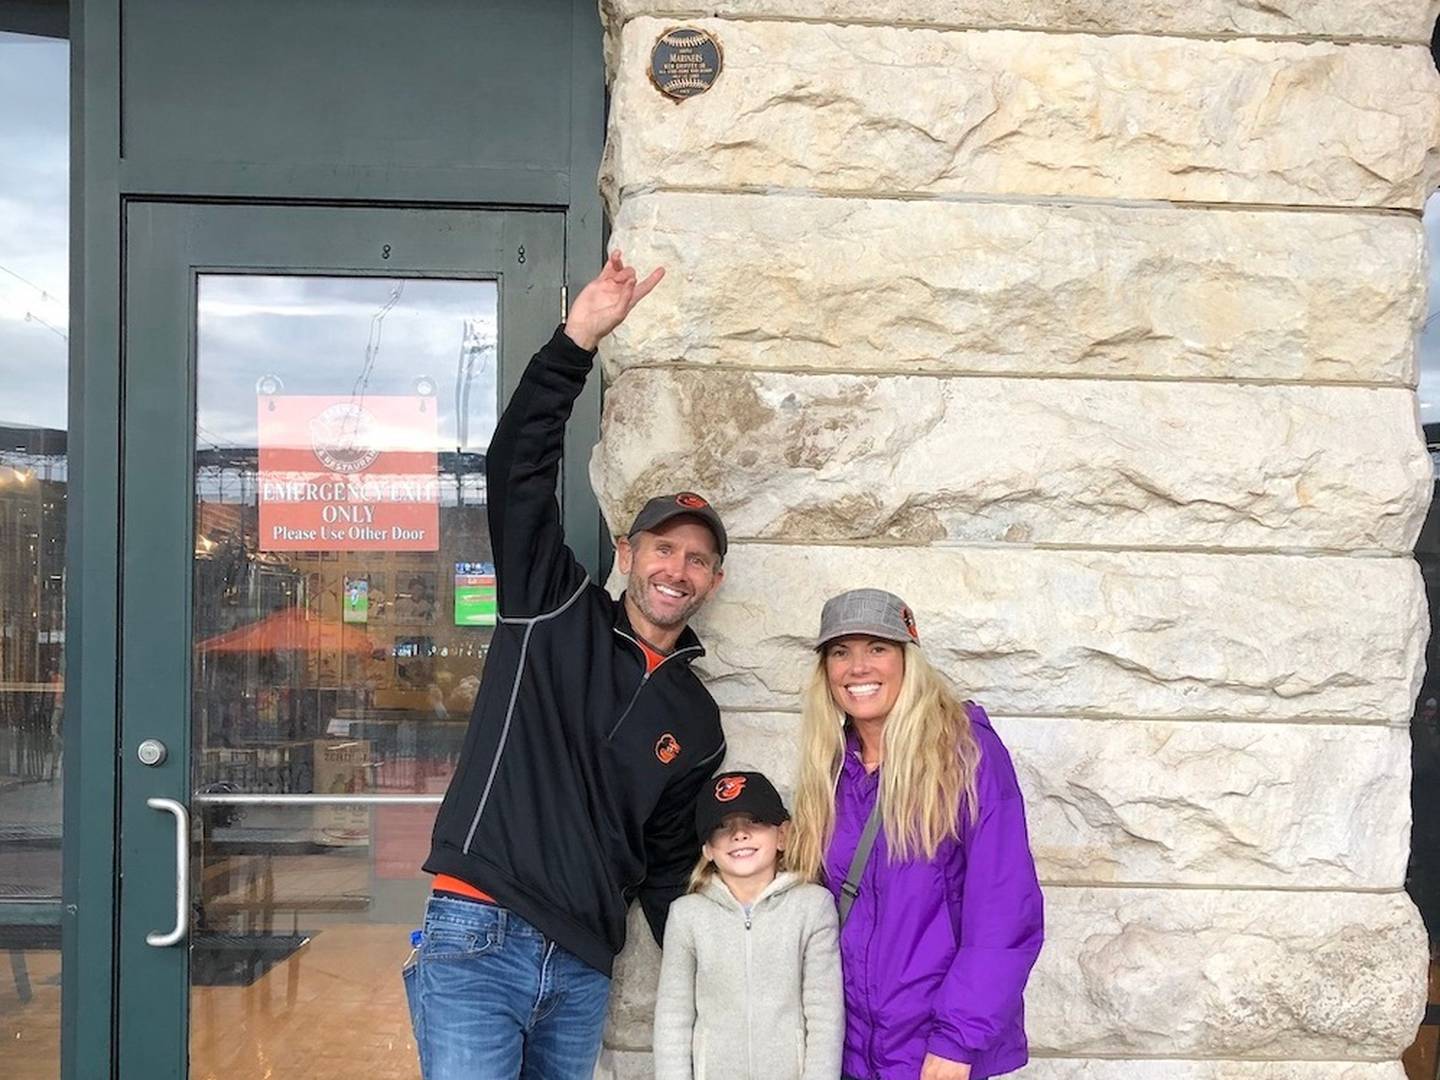 Mark Pallack poses with his daughter and wife near the plaque marking the spot where Ken Griffey Jr.'s Home Run Derby shot hit the Warehouse at Camden Yards in 1993. Pallack snagged the ball after it ricocheted off the wall. (Photo courtesy of Mark Pallack)